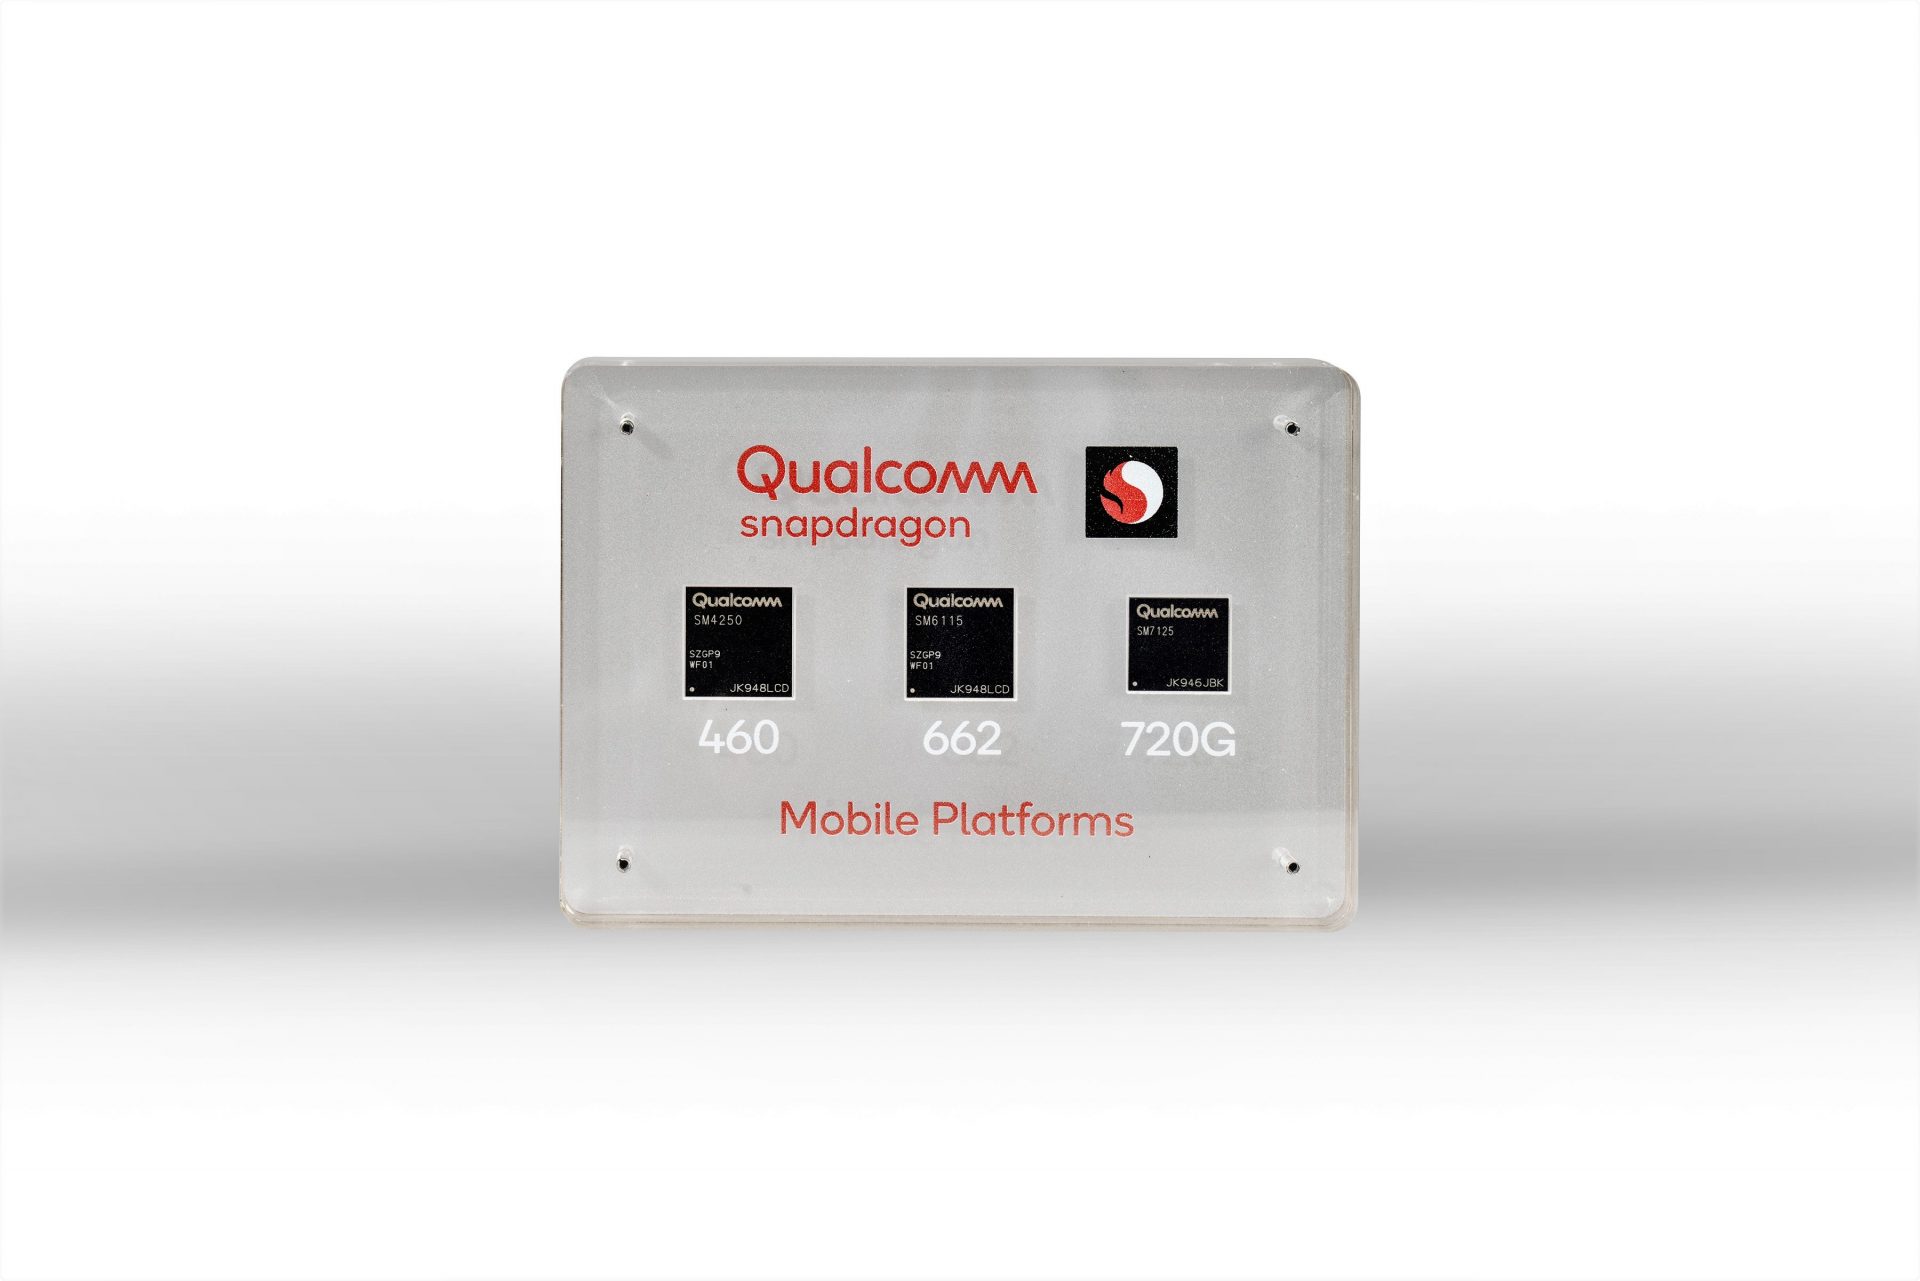 Qualcomm Brings Advanced Smartphone Features & Ecosystem Strengths to Snapdragon 4,6,7 Series LTE Platforms